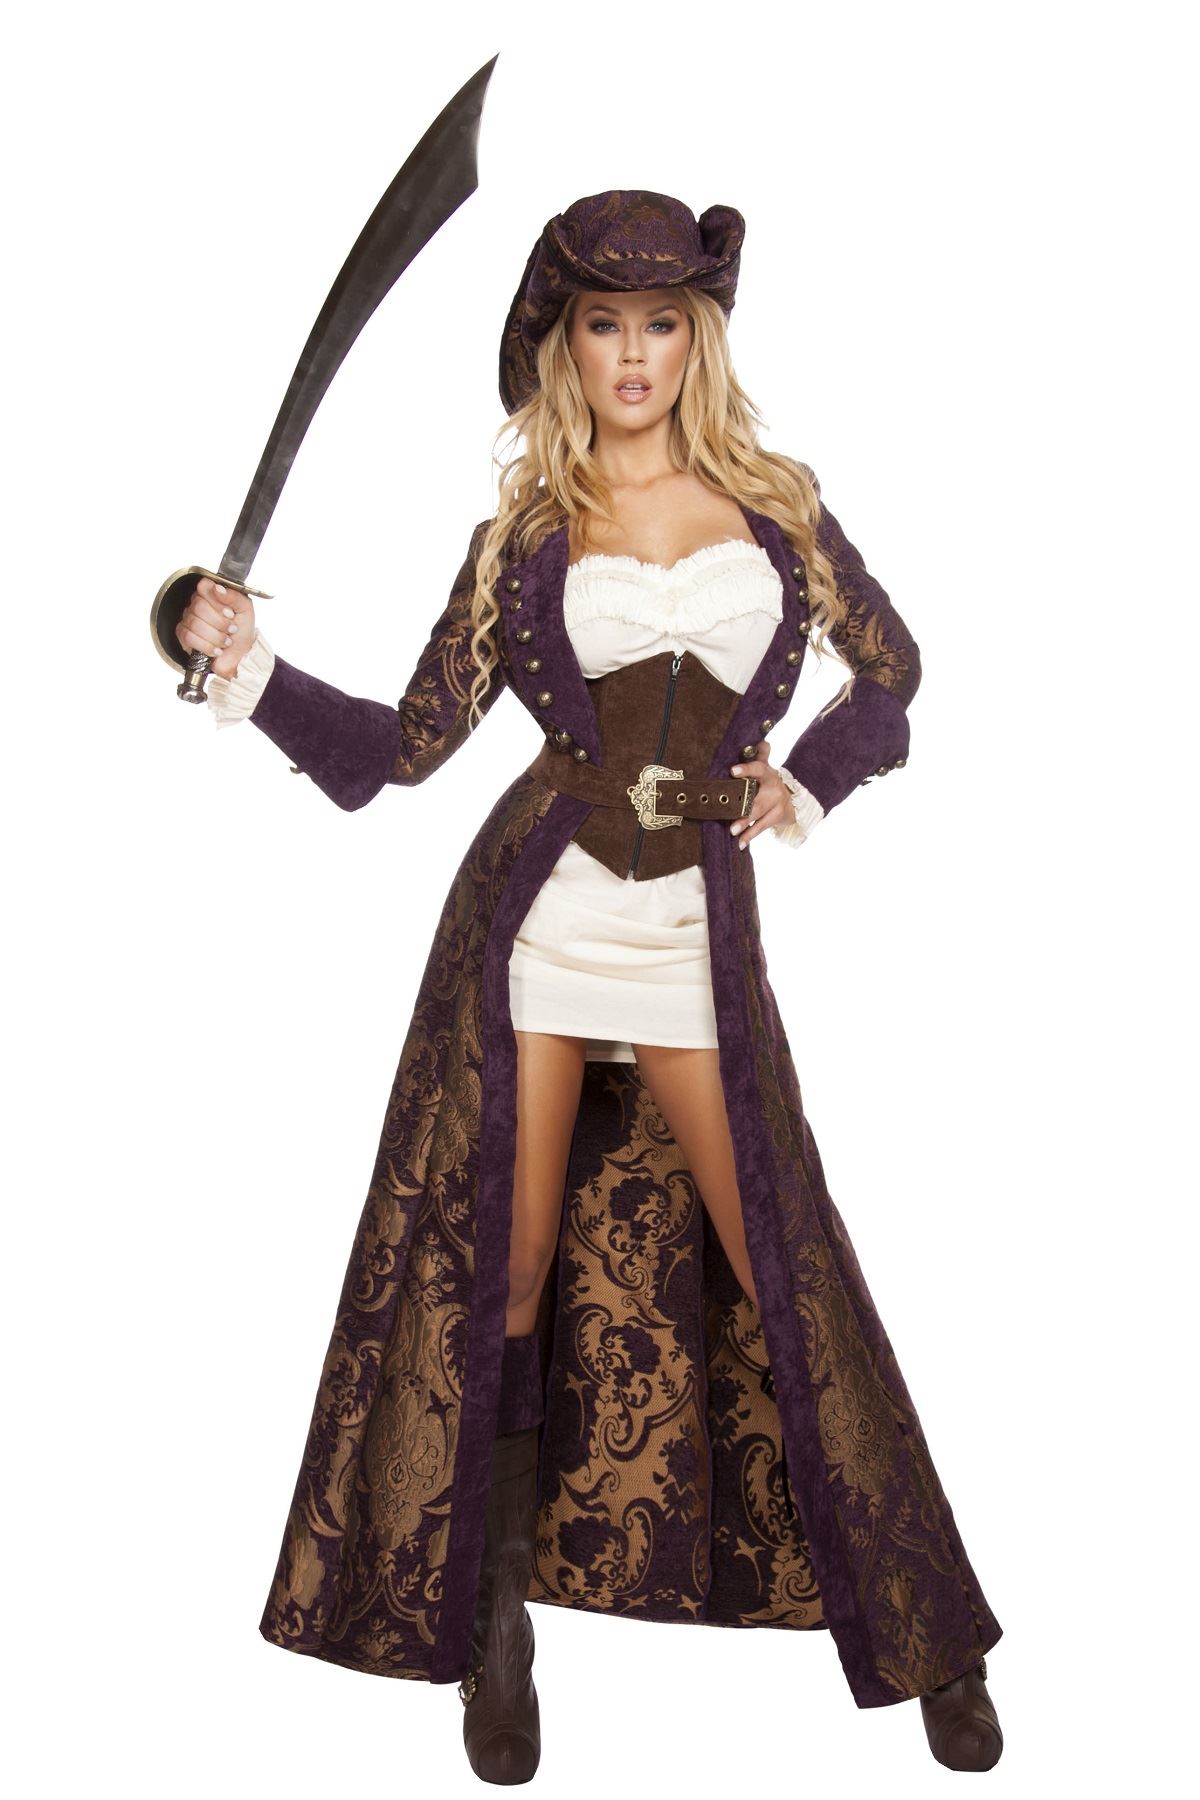 Adult Decadent Pirate Diva Woman Deluxe Costume 22999 The Costume Land 9432